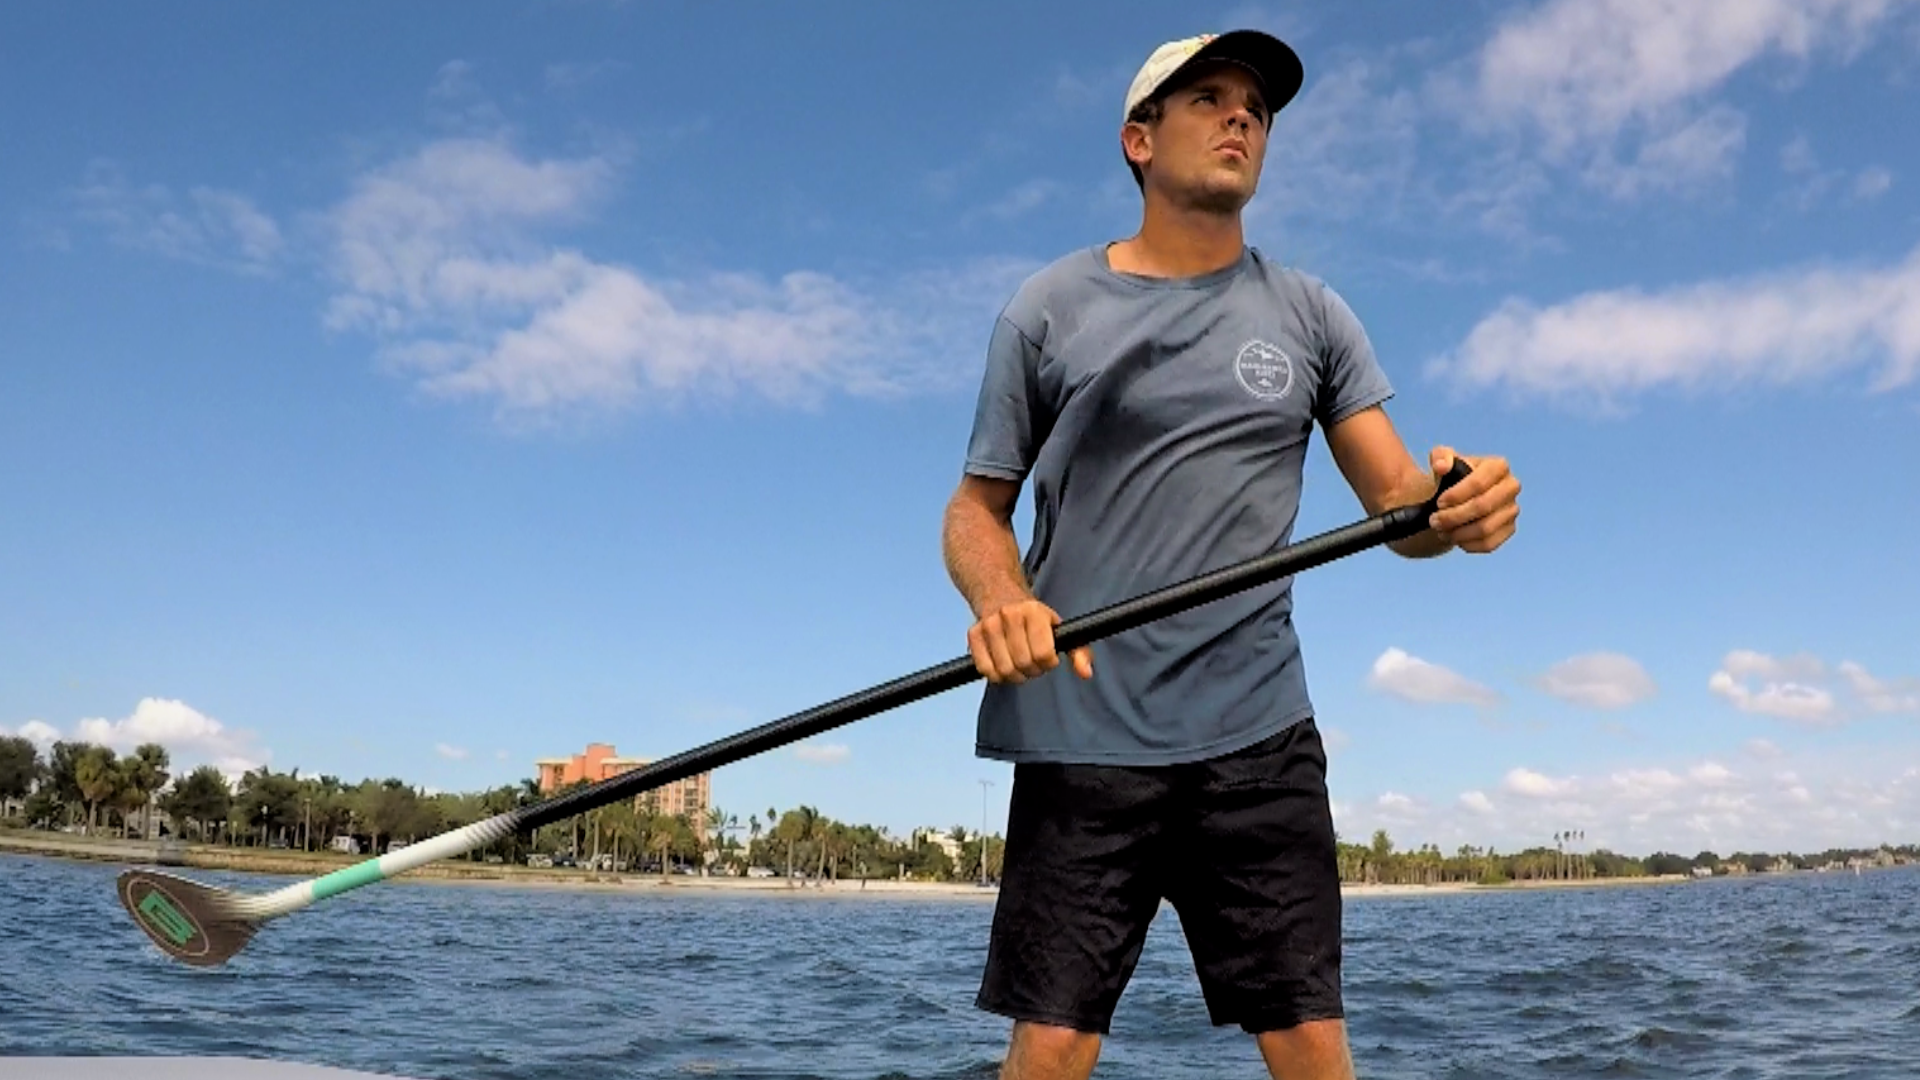 Nicholas Holzerland is about to paddleboard around the state of Florida and into the Bahamas in hopes of raising money for a foster home in his community.